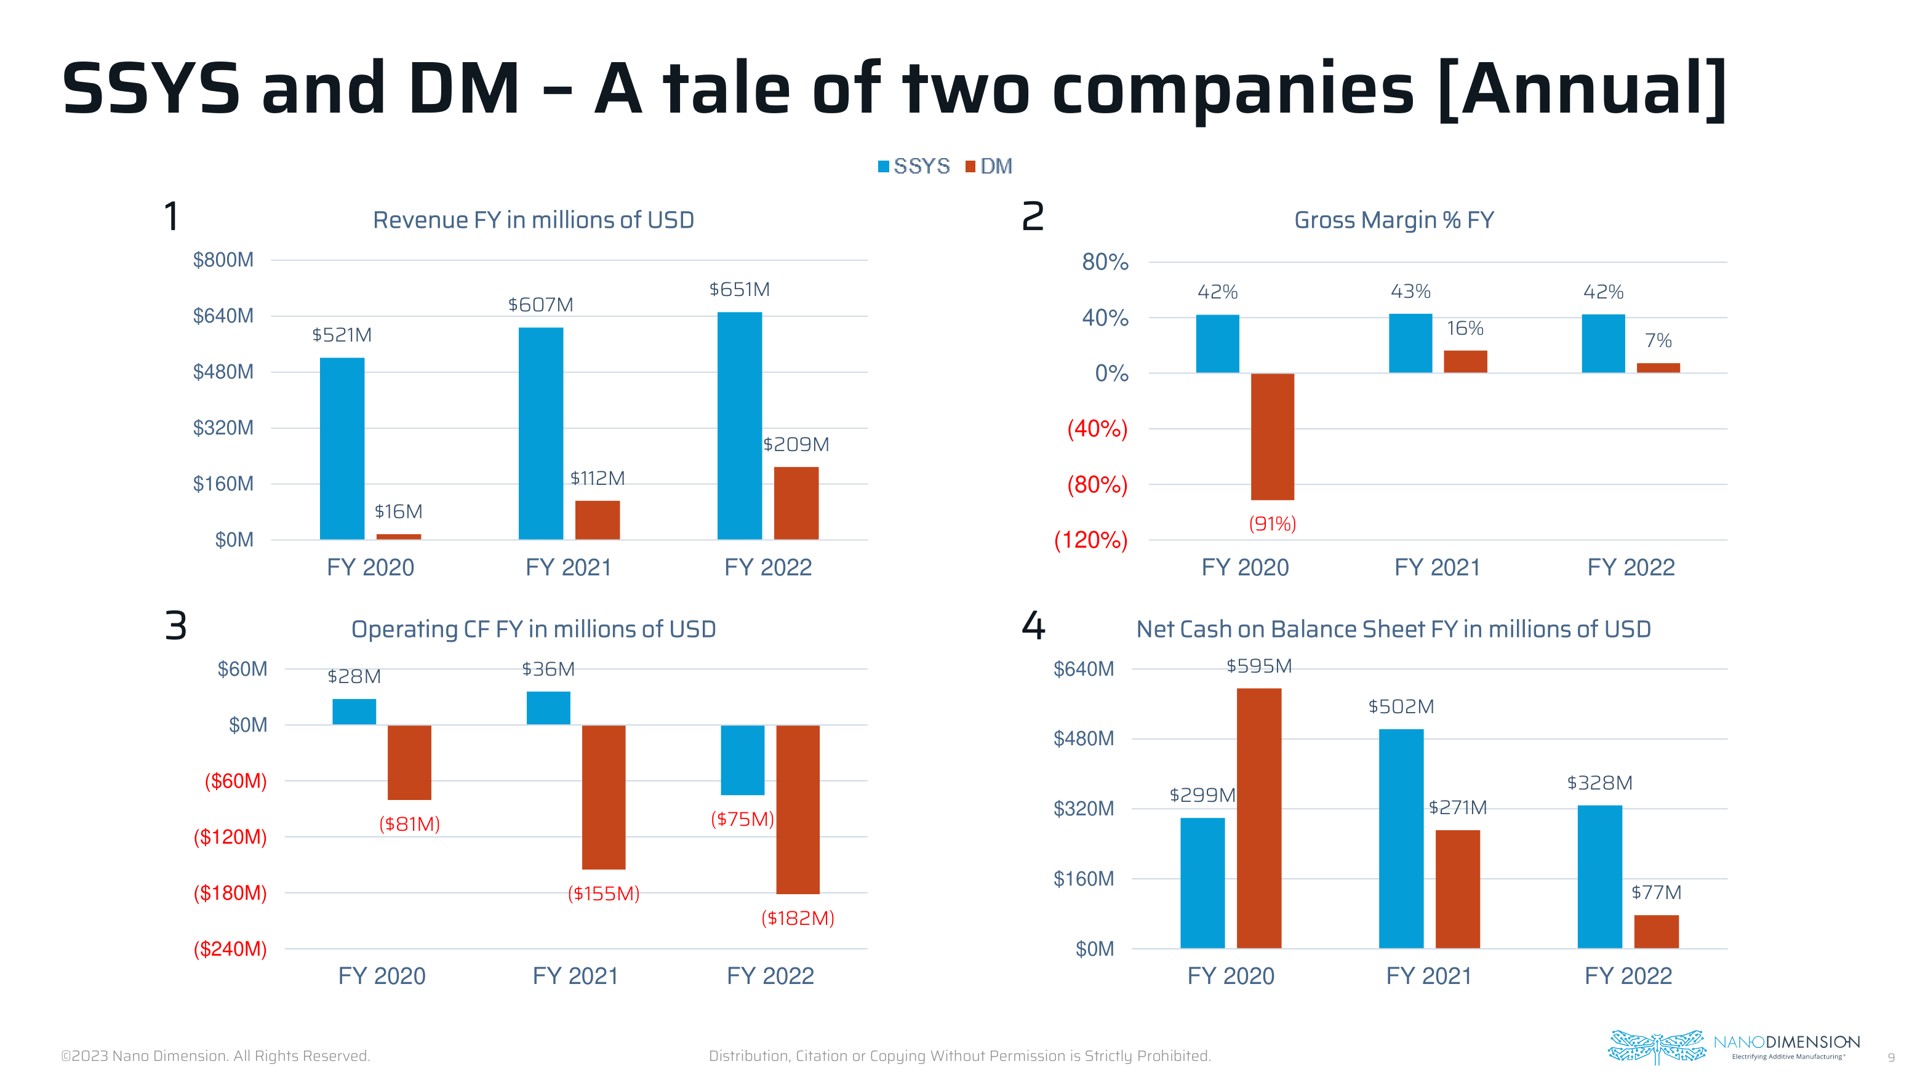 and a tale of two companies annual | Nano Dimension